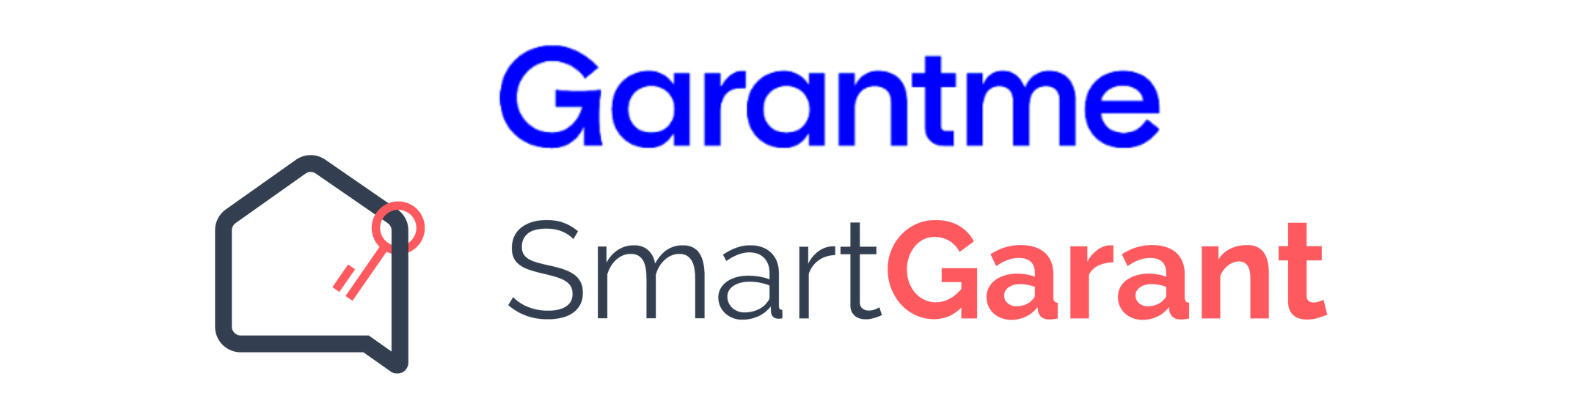 Our partnerships with Garantme and SmartGarant provide a solution by acting as guarantors.